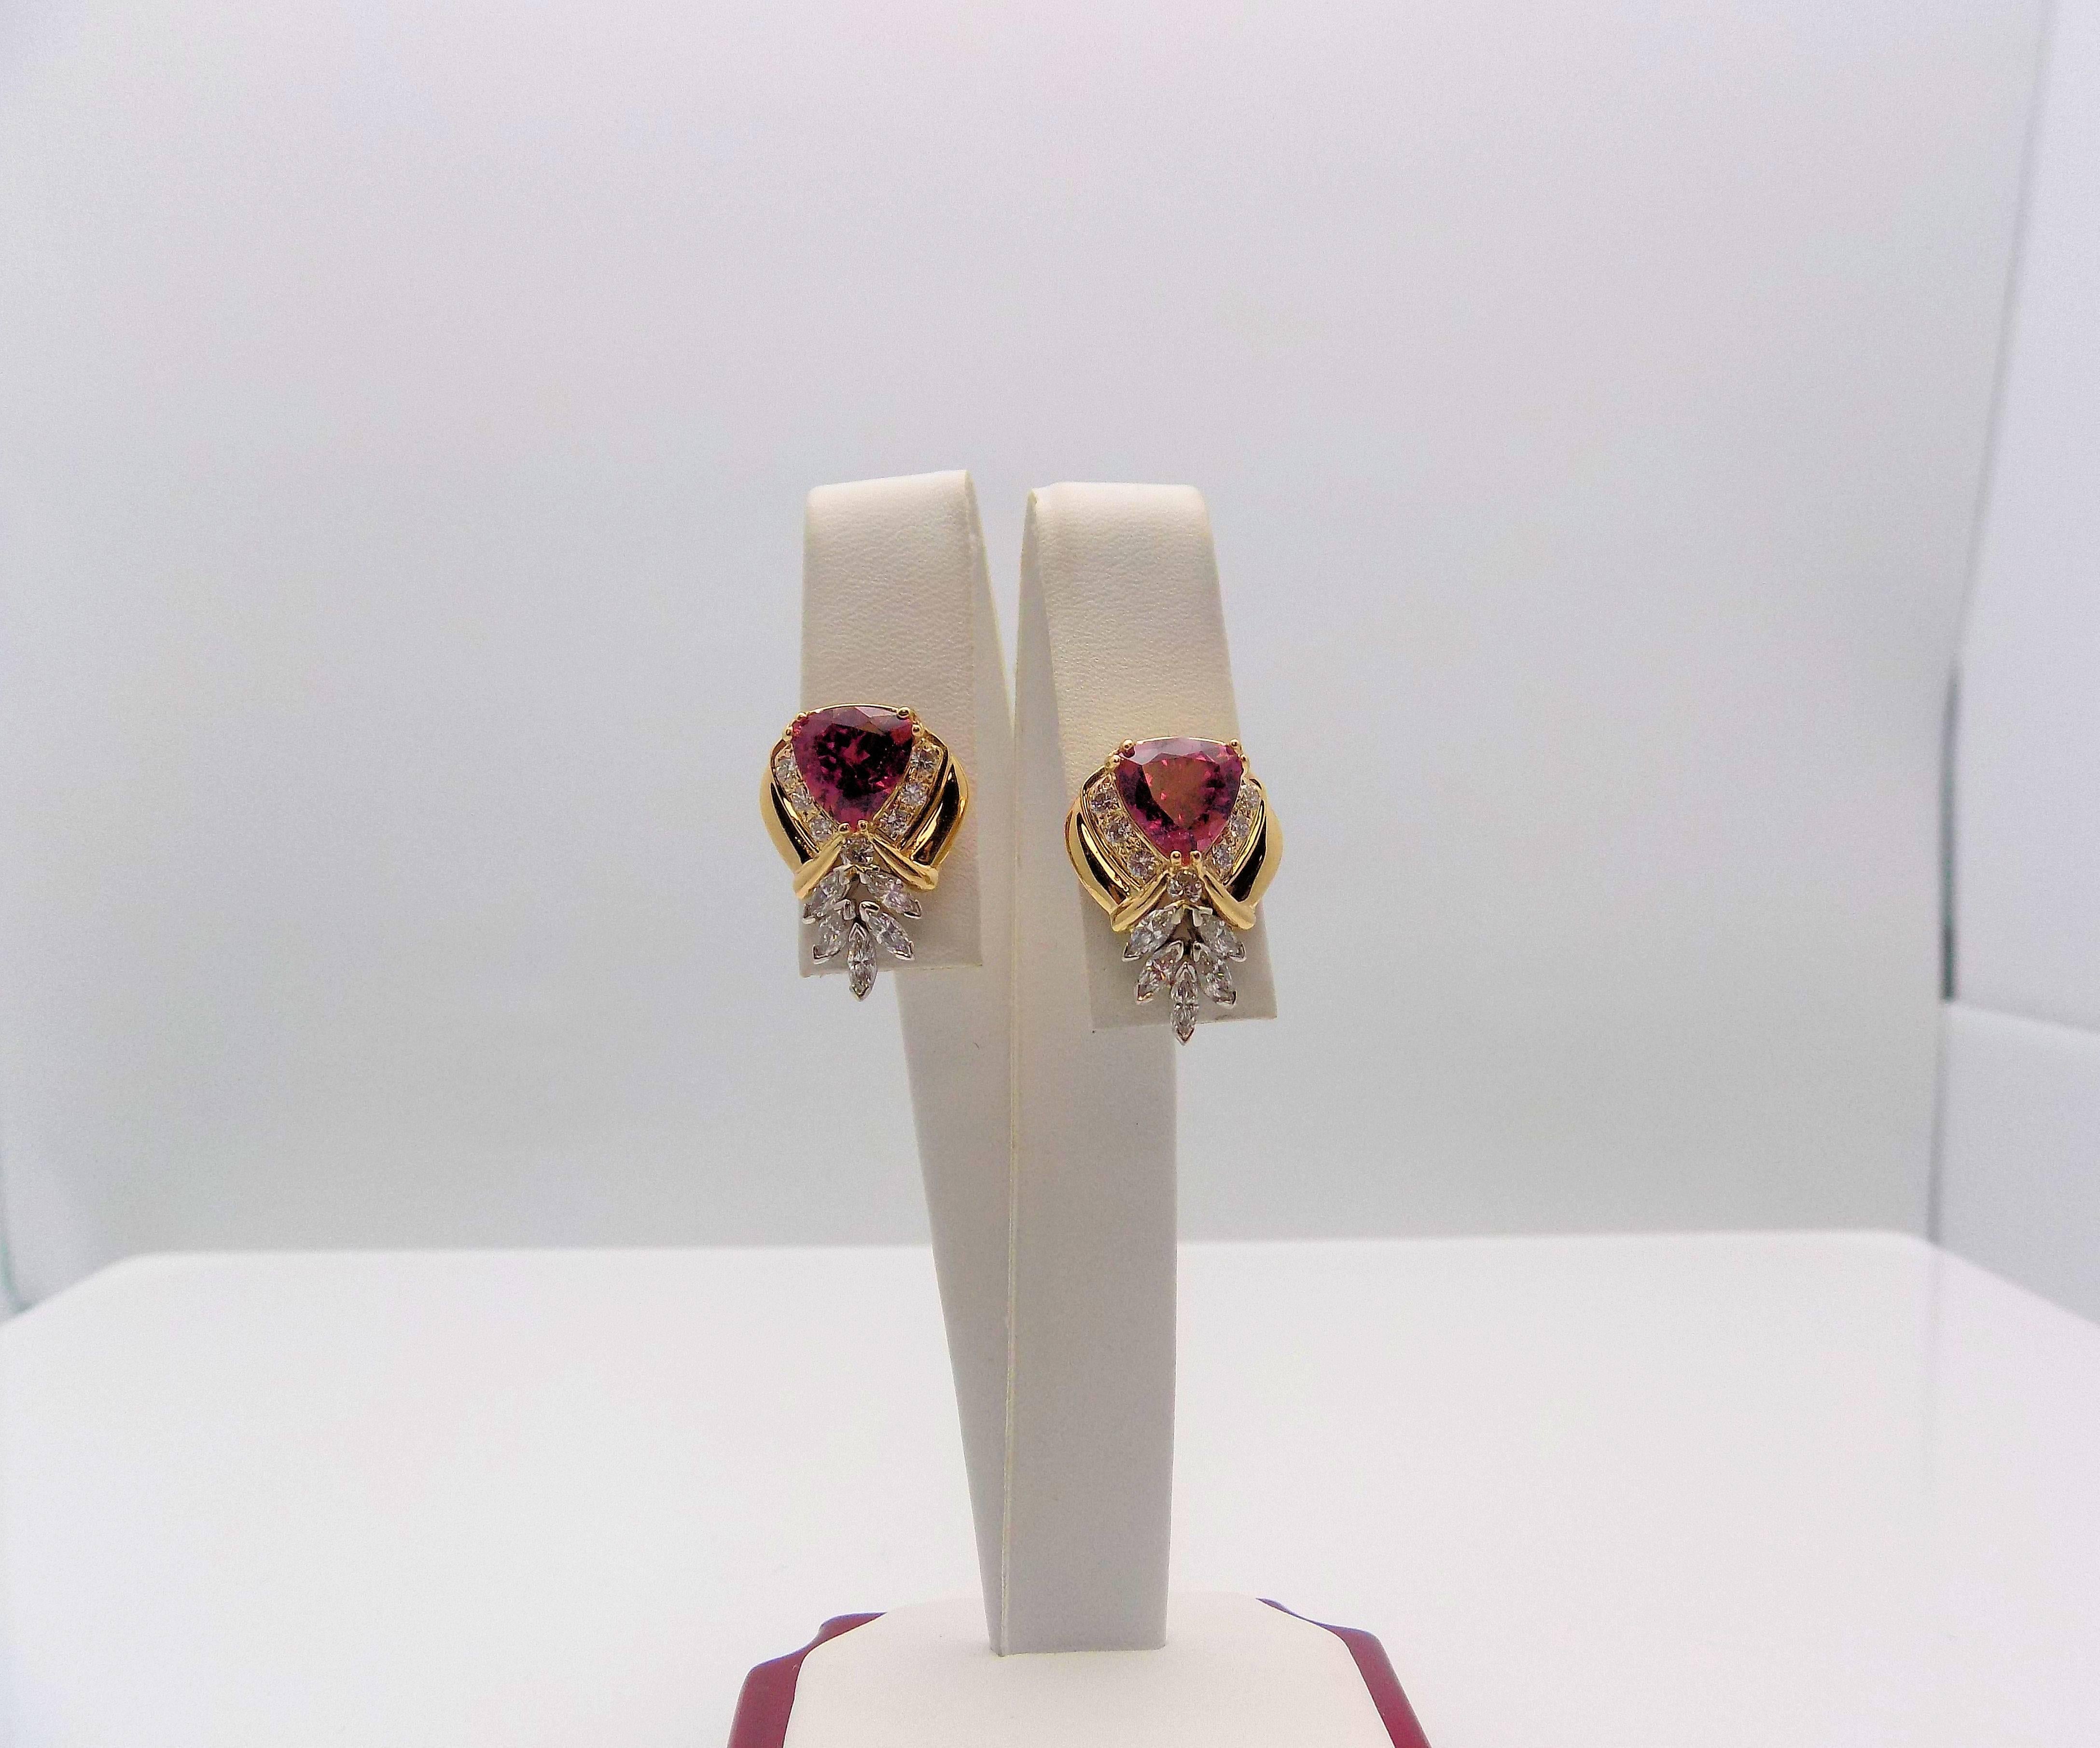 Pair 14 Karat Yellow Gold/White Gold Pierced Earrings. 2 Trillion Cut Pink Tourmalines 3.00 Carat Total Weight; 14 Round Brilliant Diamonds, 10 Marquis Cut Diamonds 0.85 Carat Total Weight, SI, H-I; Gold Filled Backs; 4.5 DWT or 6.99 Grams.